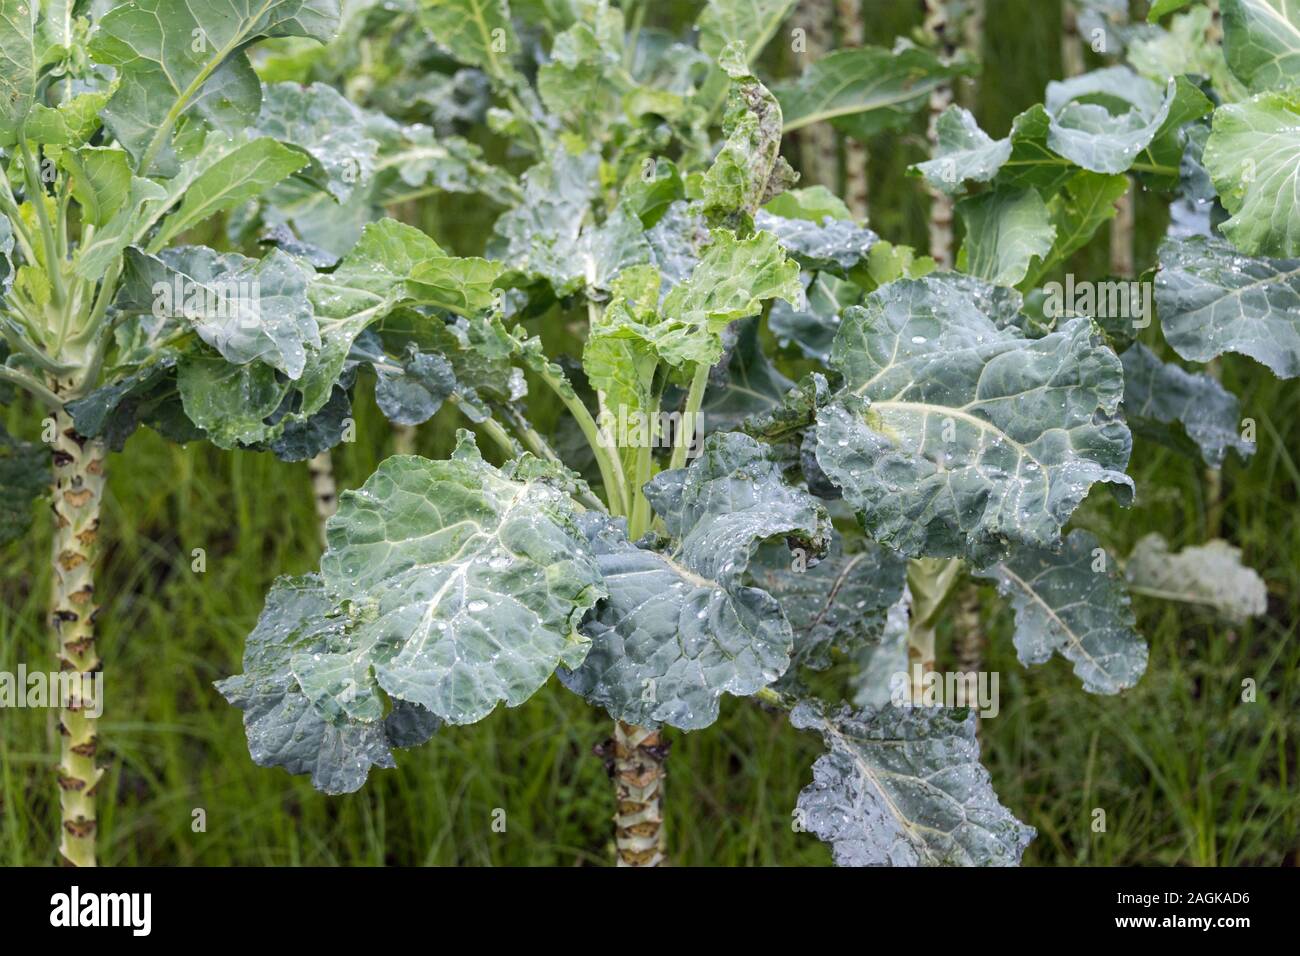 Kale cabbage. Winter cabbage also known as italian kale or lacinato growth in row. Ogranic cabbage mediterranean garden. Ingredient in italian and Stock Photo